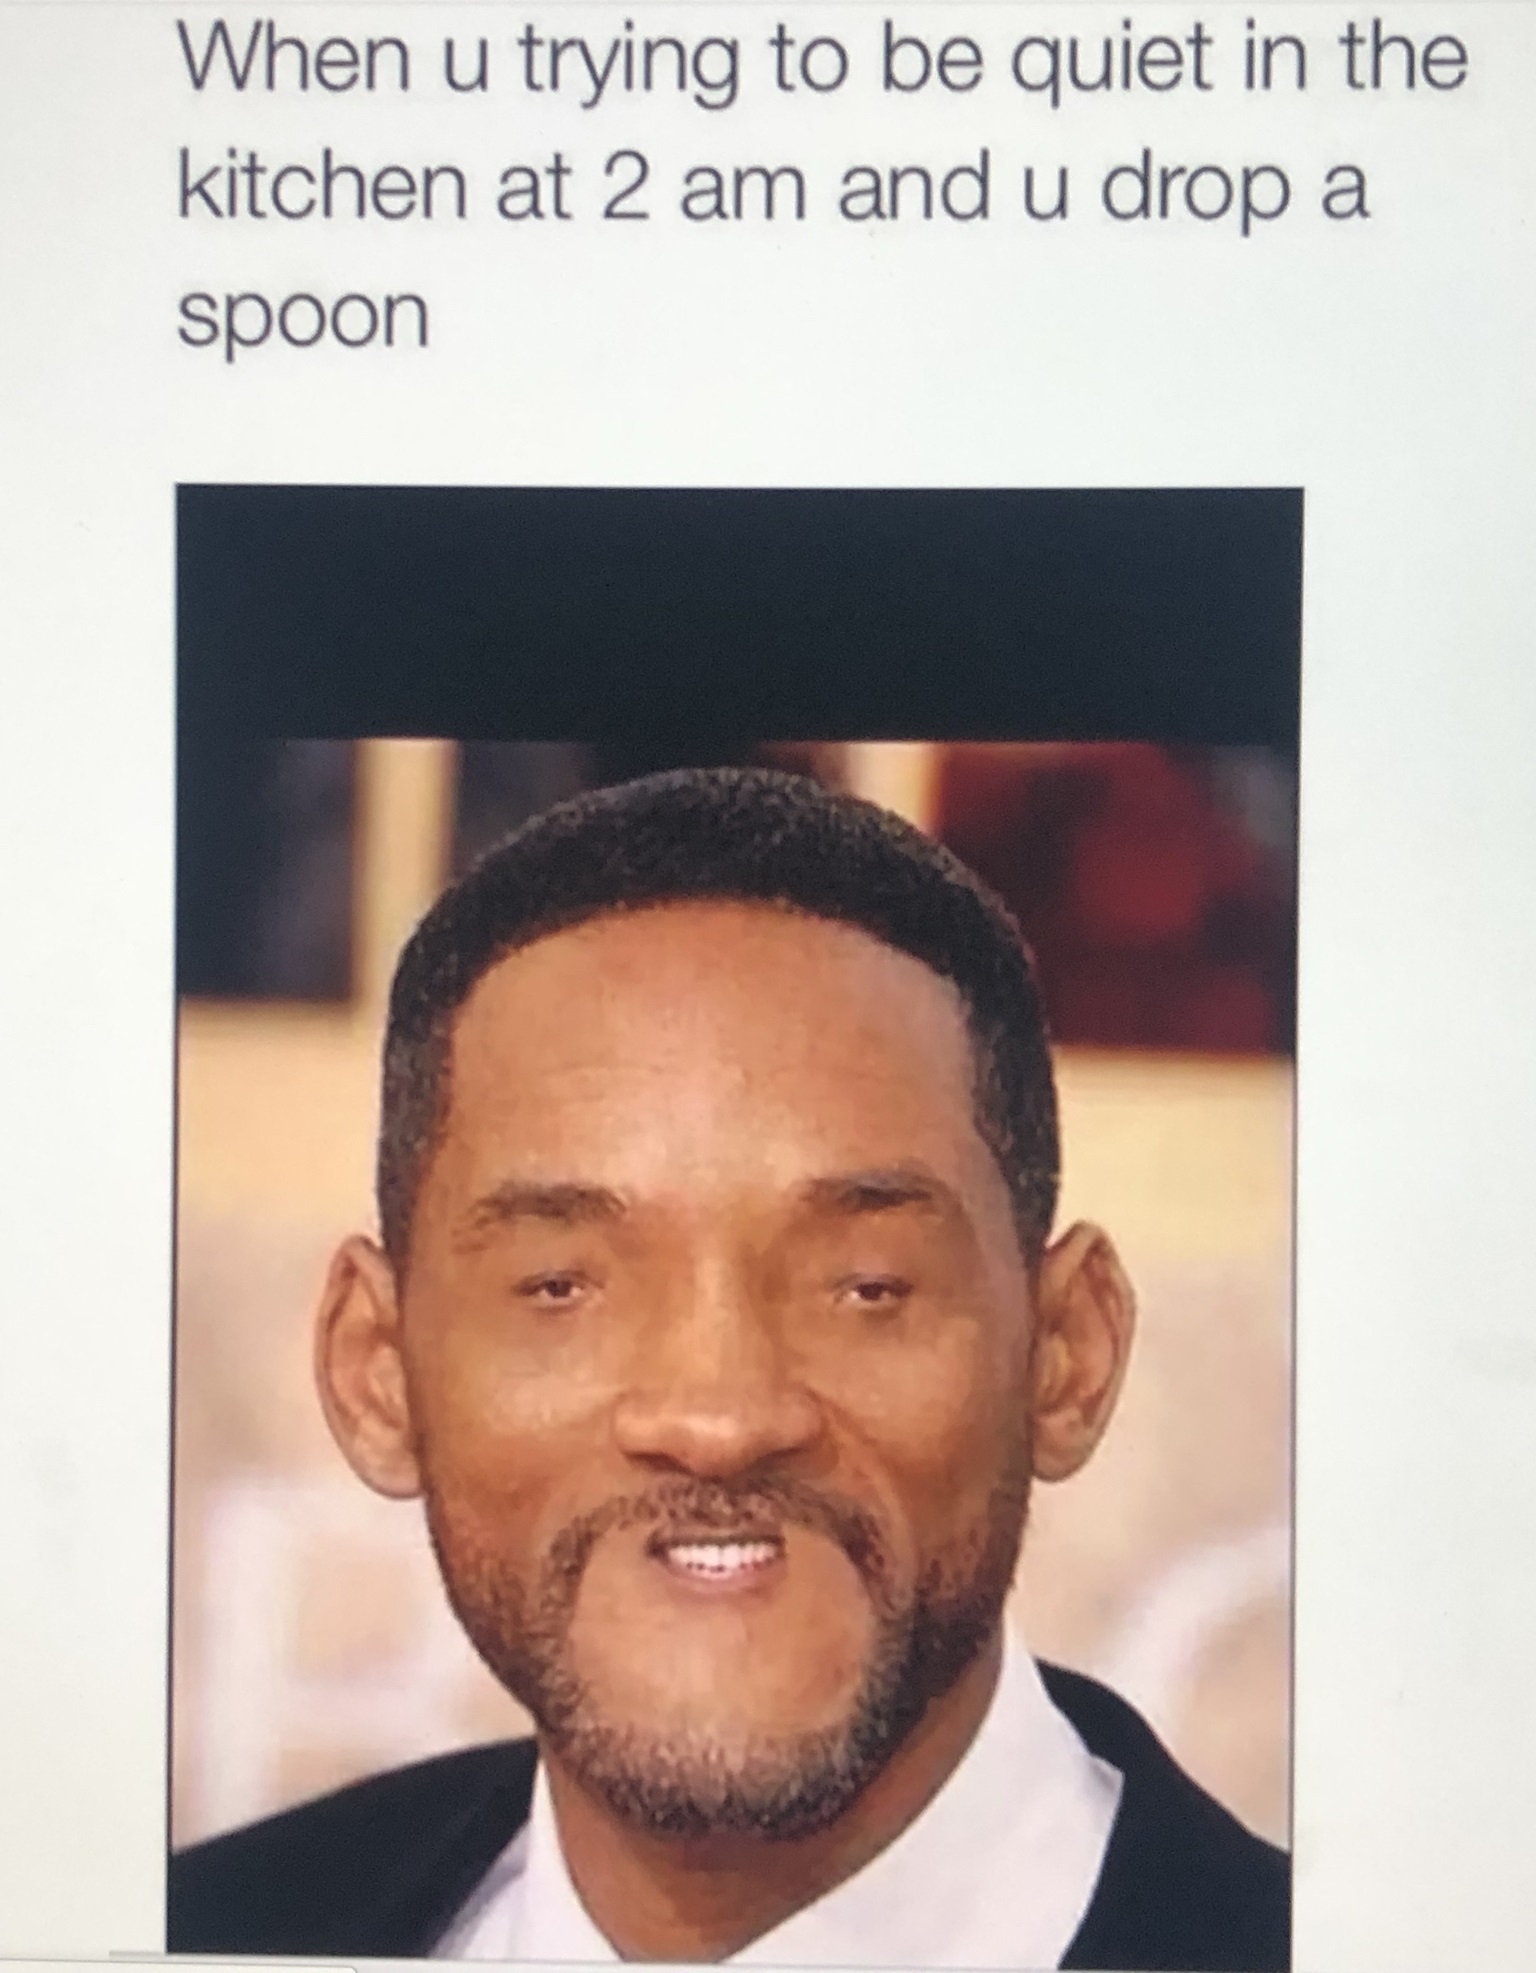 will smith - When u trying to be quiet in the kitchen at 2 am and u drop a spoon